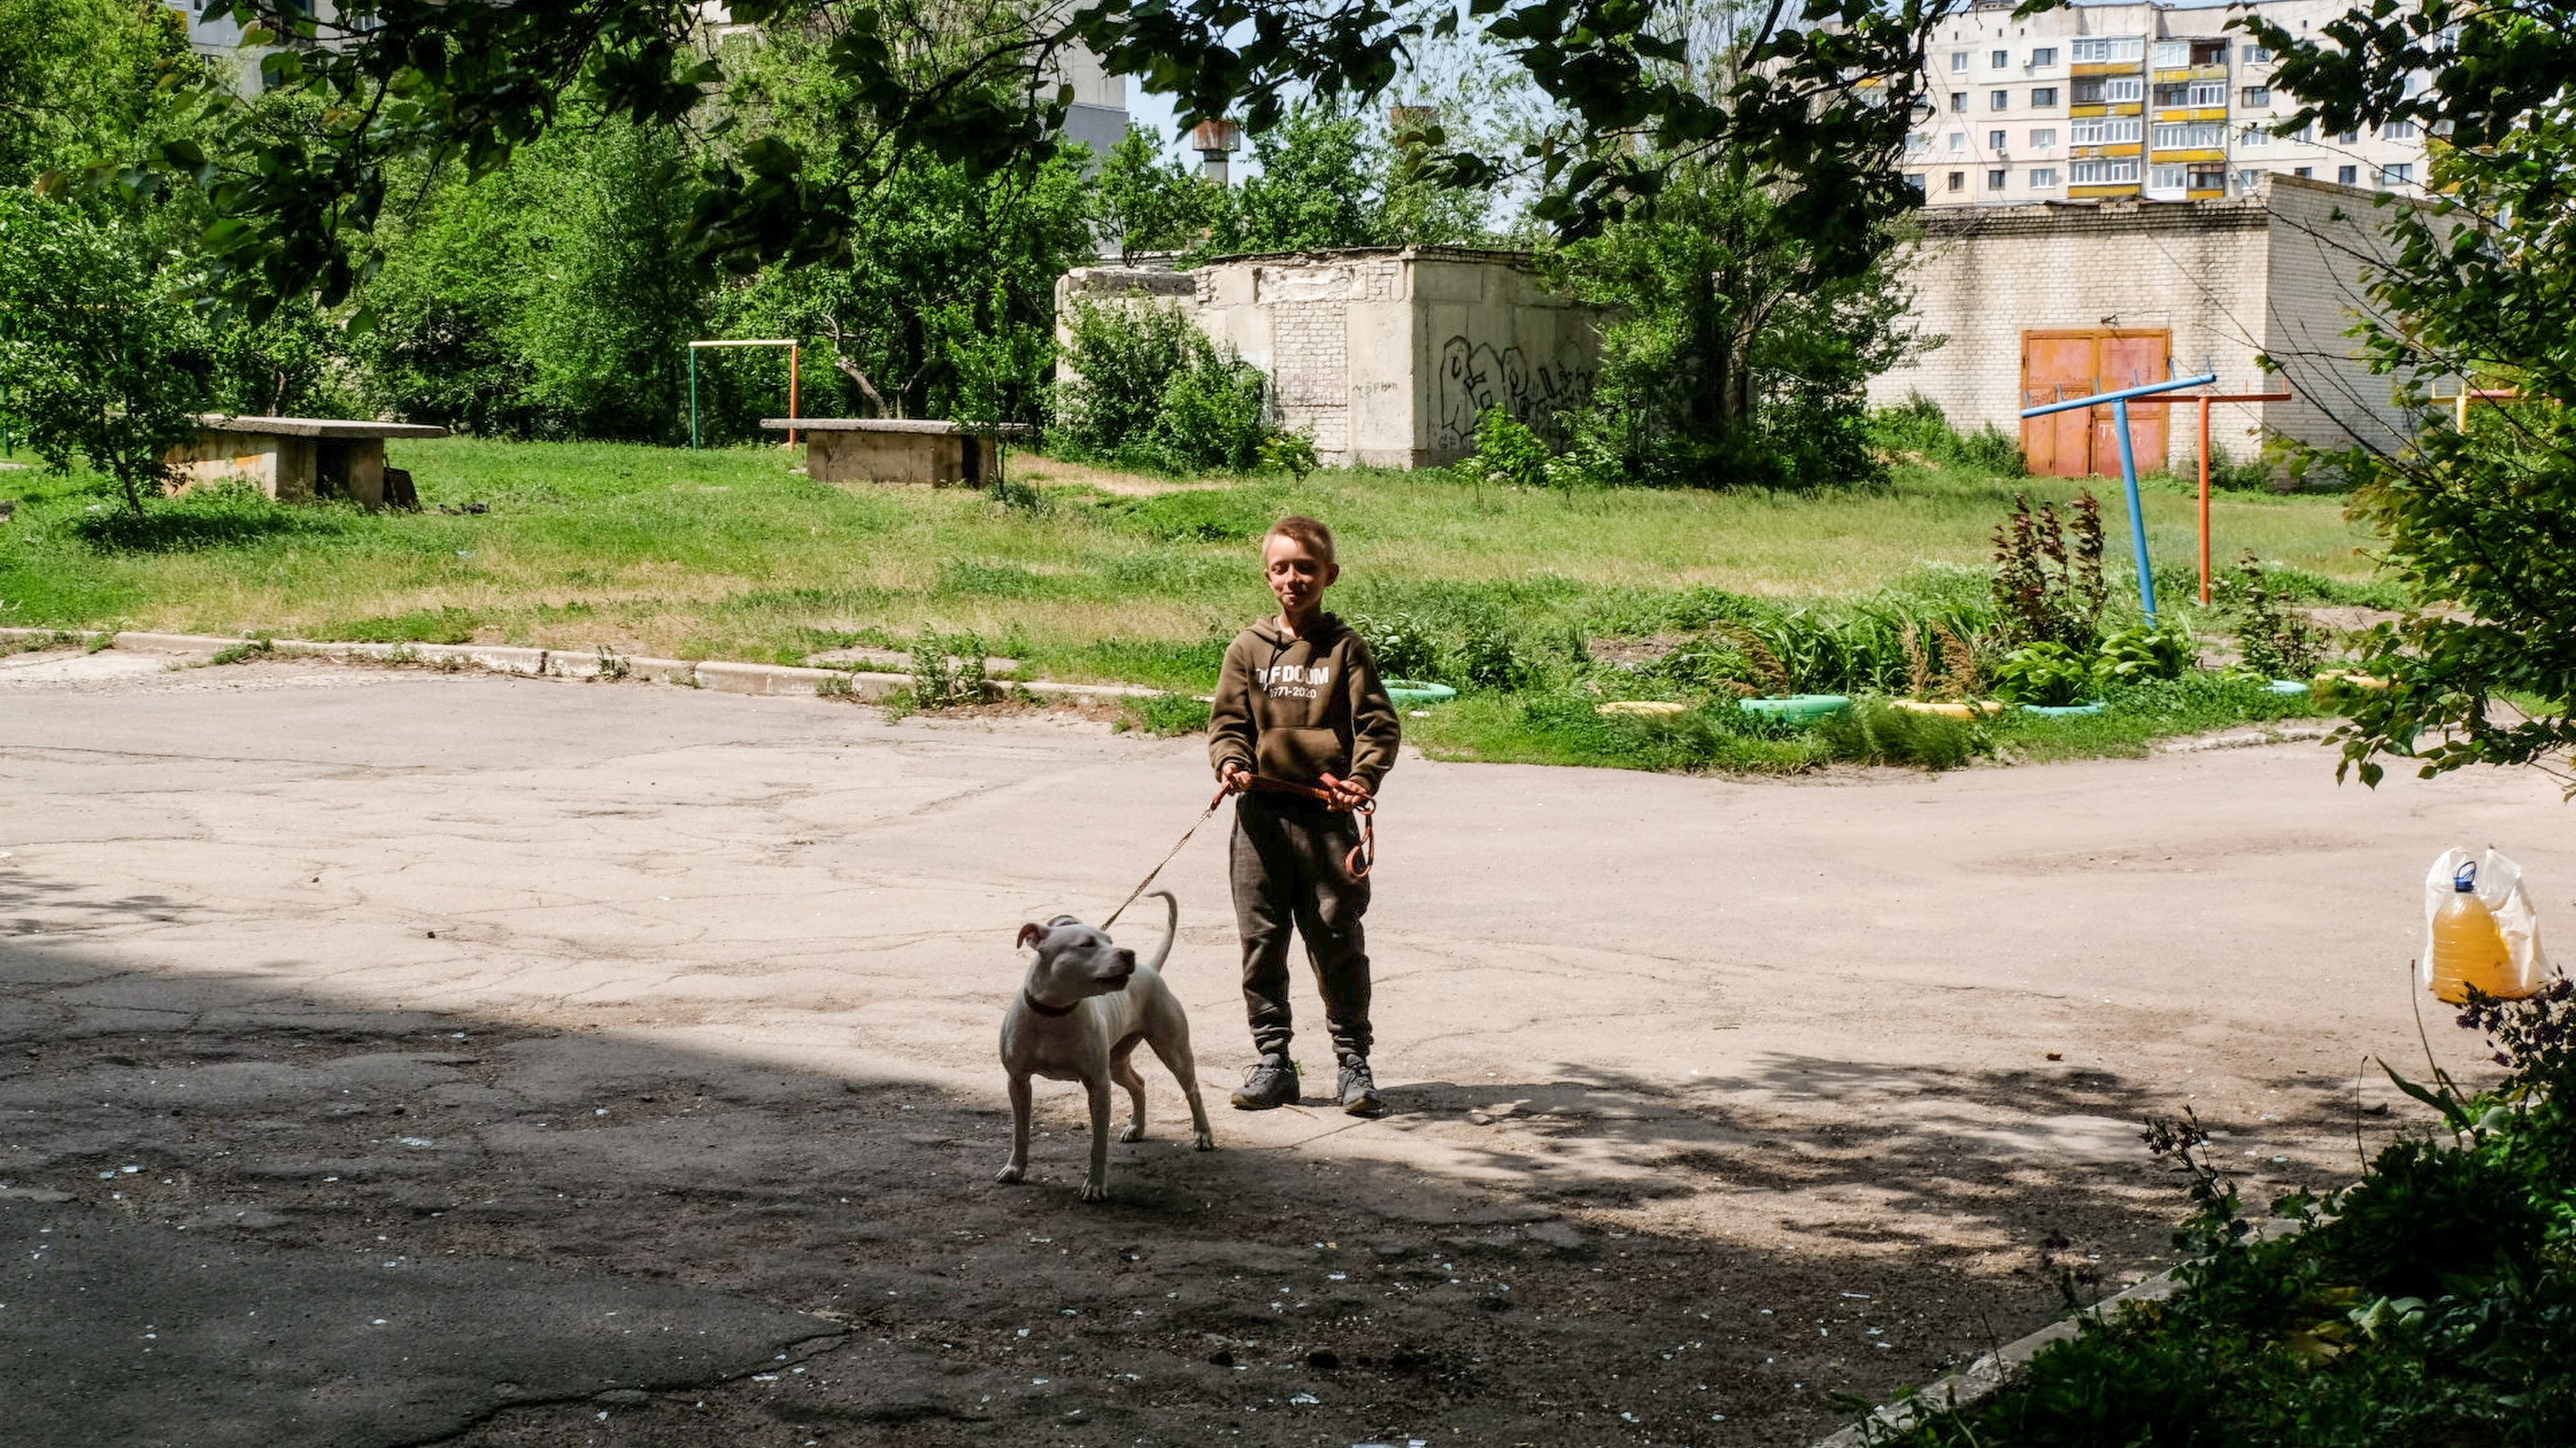 A young boy seen with a dog in a backyard of a residential